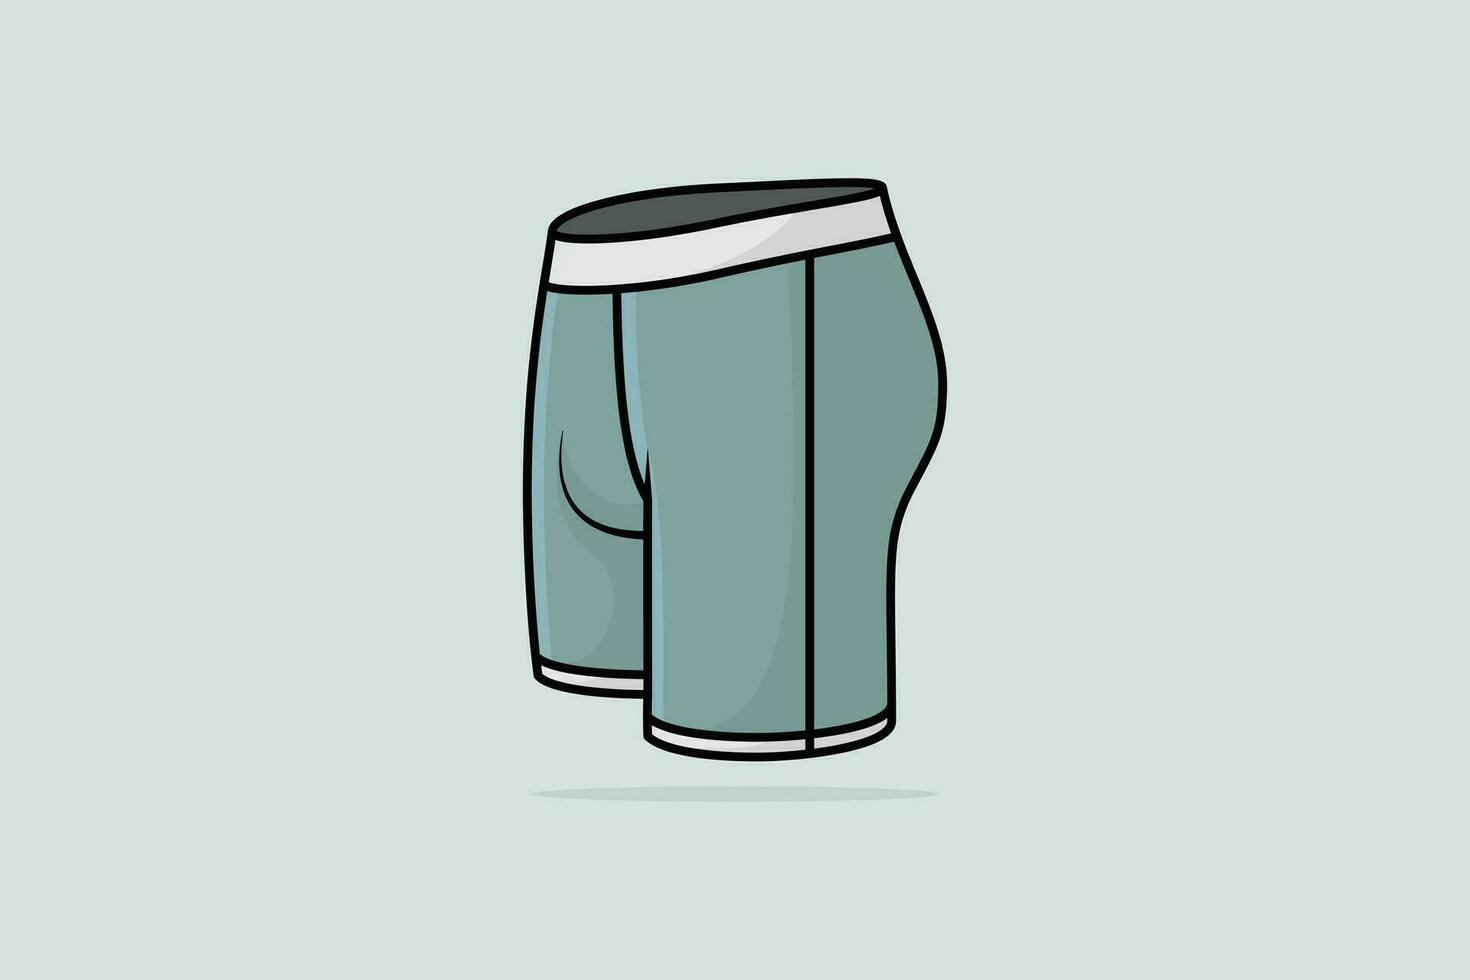 Gym Wear Causal Short Knicker vector illustration. Sports and Fashion objects icon concept. Boys swimming short knicker and casual wear vector design with shadow.